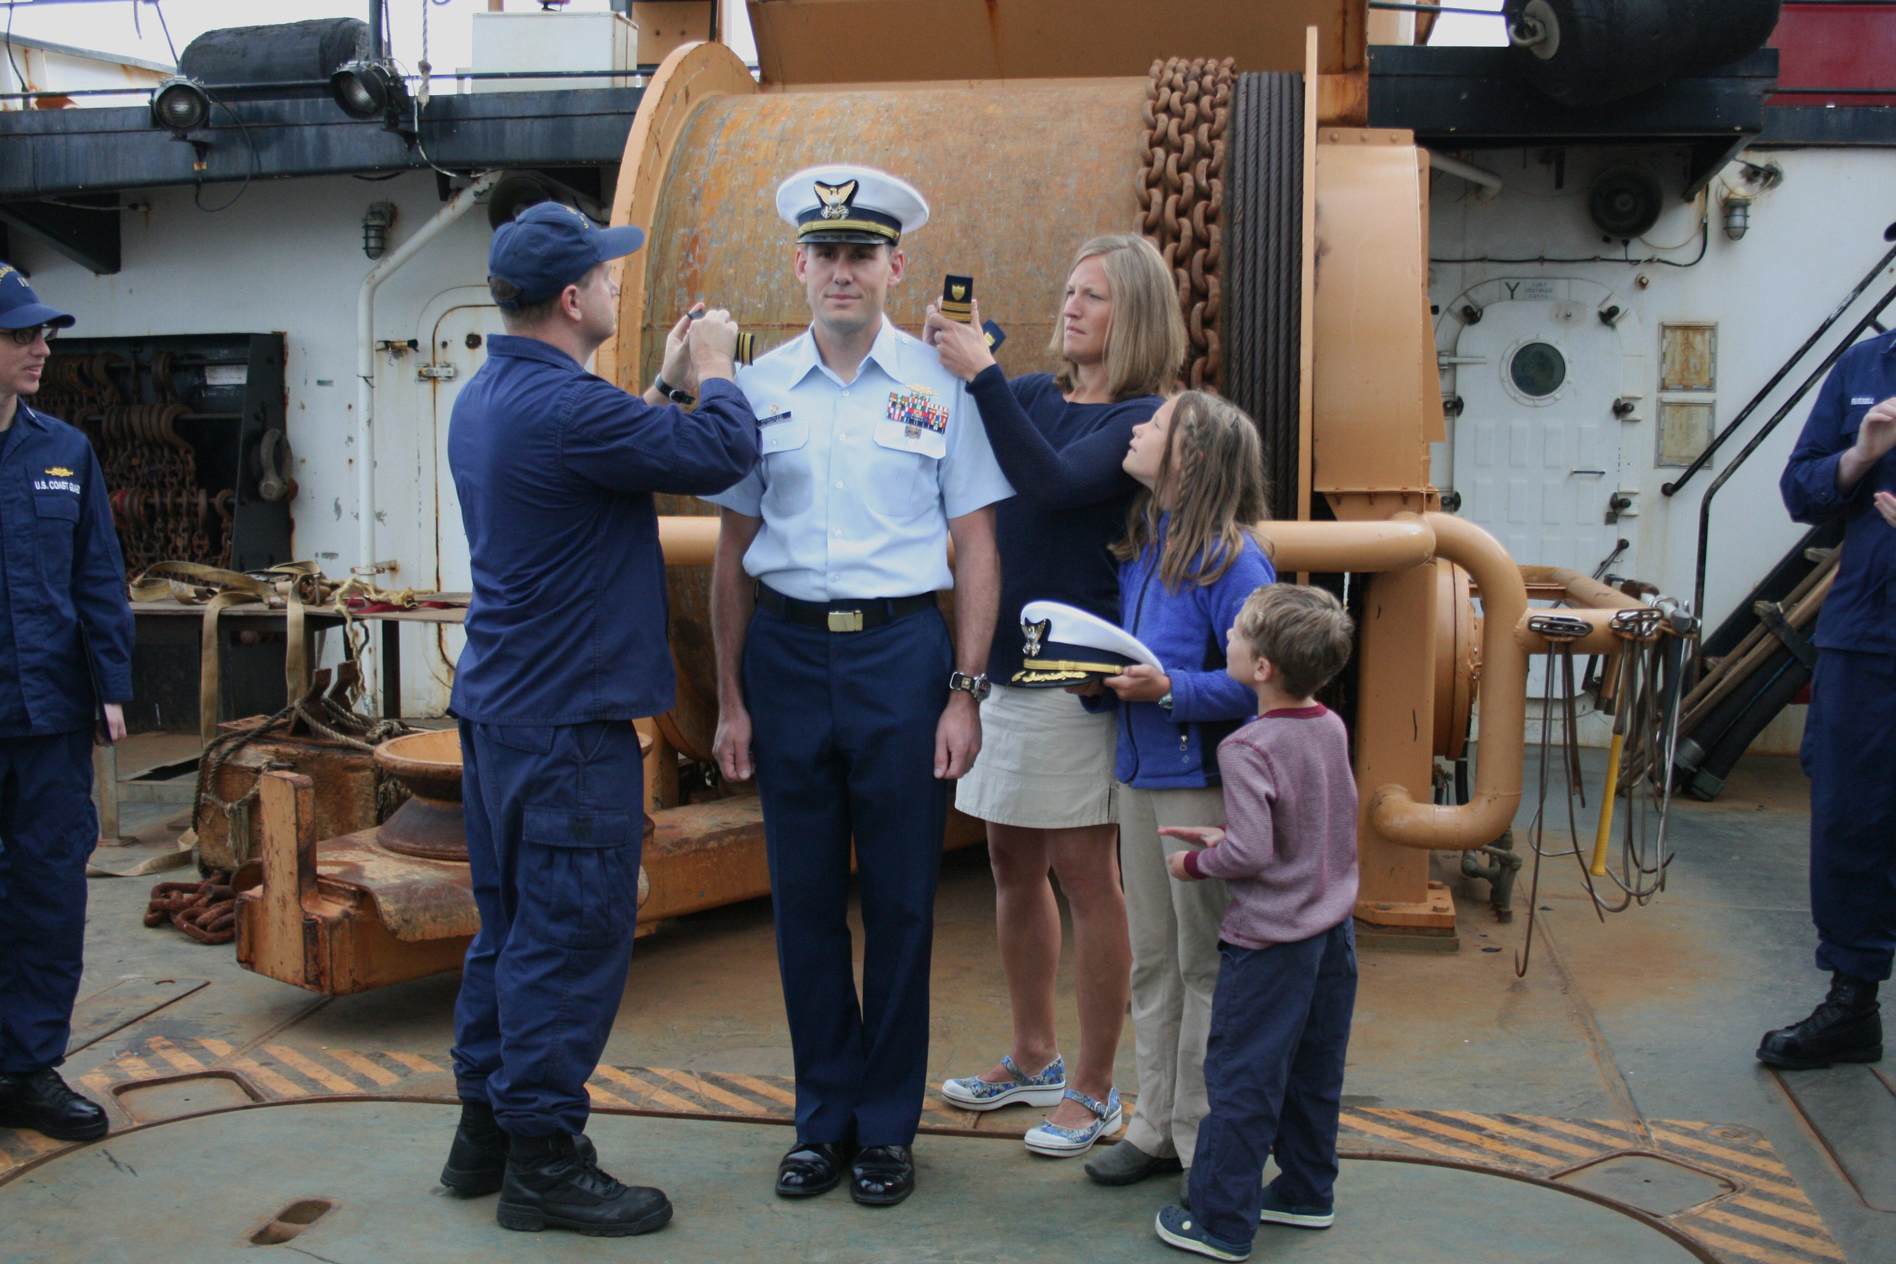 Chief Petty Officer Travis Clark assists the family of Commander Brian C. Krautler in pinning on Krautler’s new shoulder boards bearing the Commander (O-5) insignia. Krautler, the commanding officer of the Hickory, received the promotion effective July 1. Pictured are Clark, Krautler, Krautler’s wife, Andrea, and their children, Kate, 9,  and James, 5.  The promotion was celebrated in a small ceremony held aboard the Hickory at its berth on Pioneer Pier.